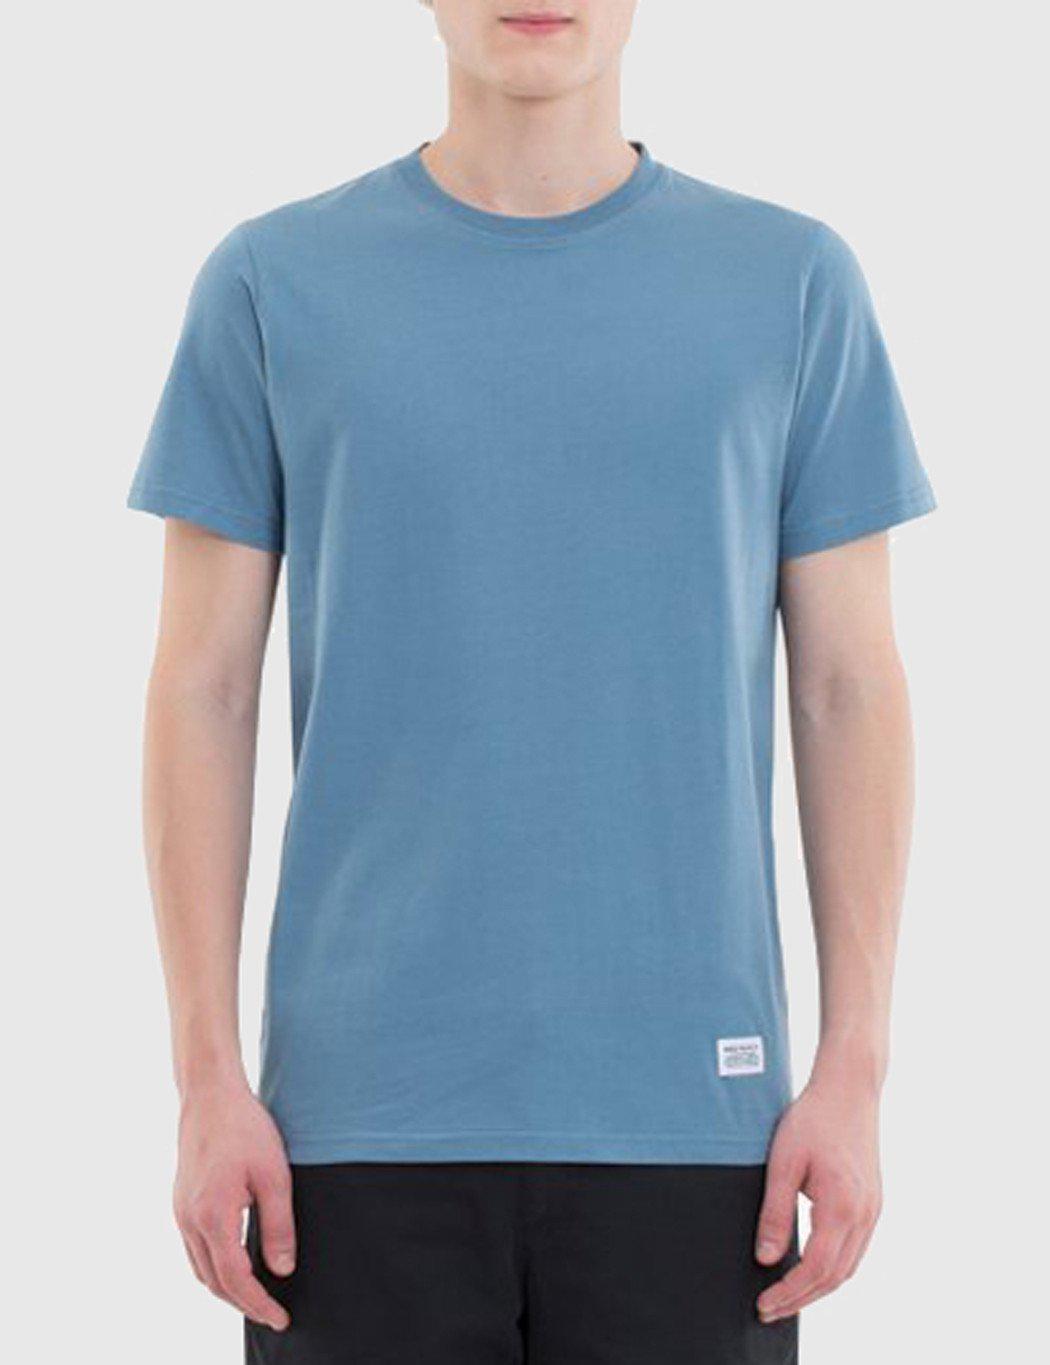 Norse Projects Niels Basic T-shirt in Blue for Men - Lyst